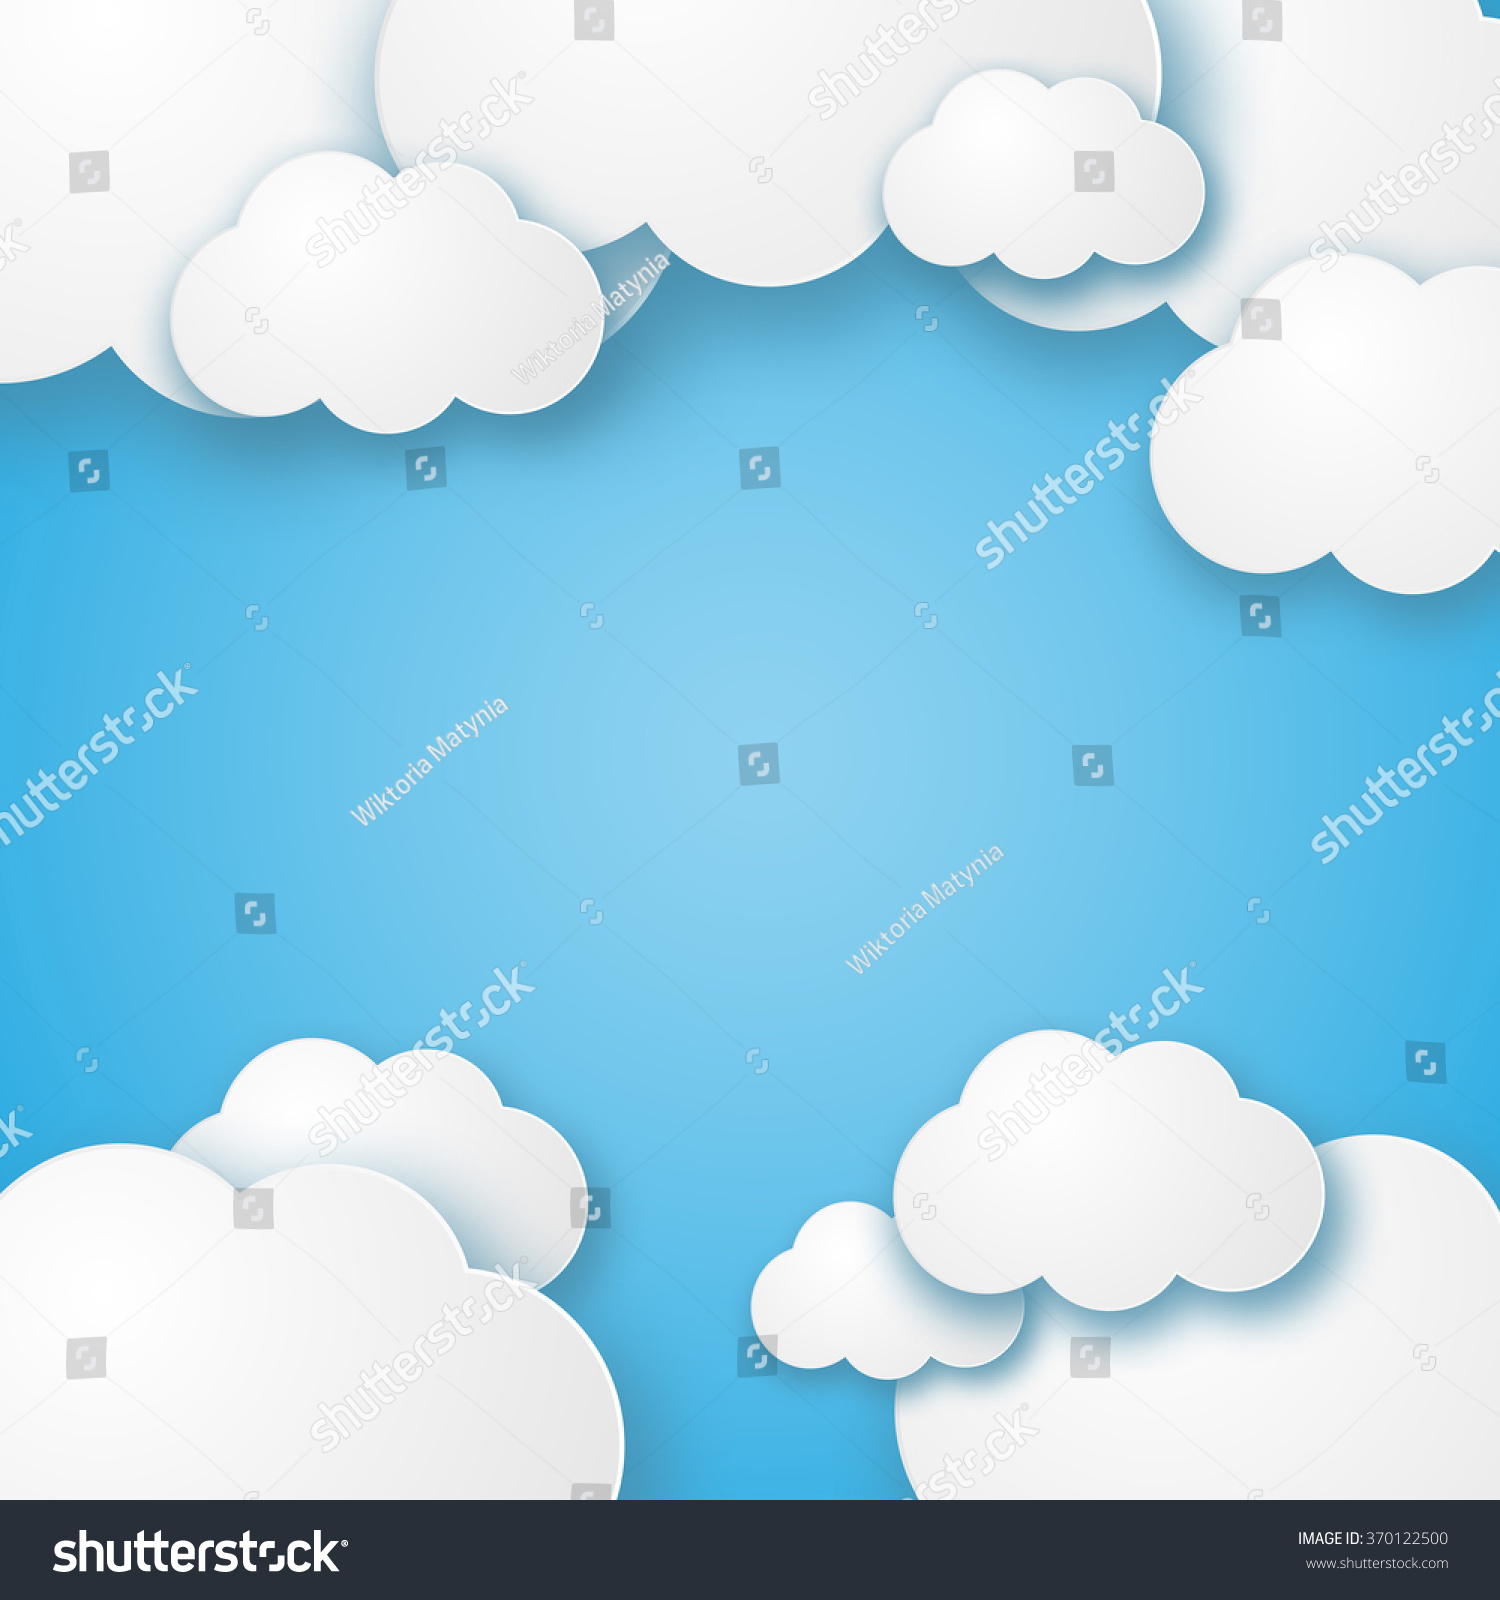 Illustration Of A Beautiful Fluffy Empty Clouds On A Blue Background